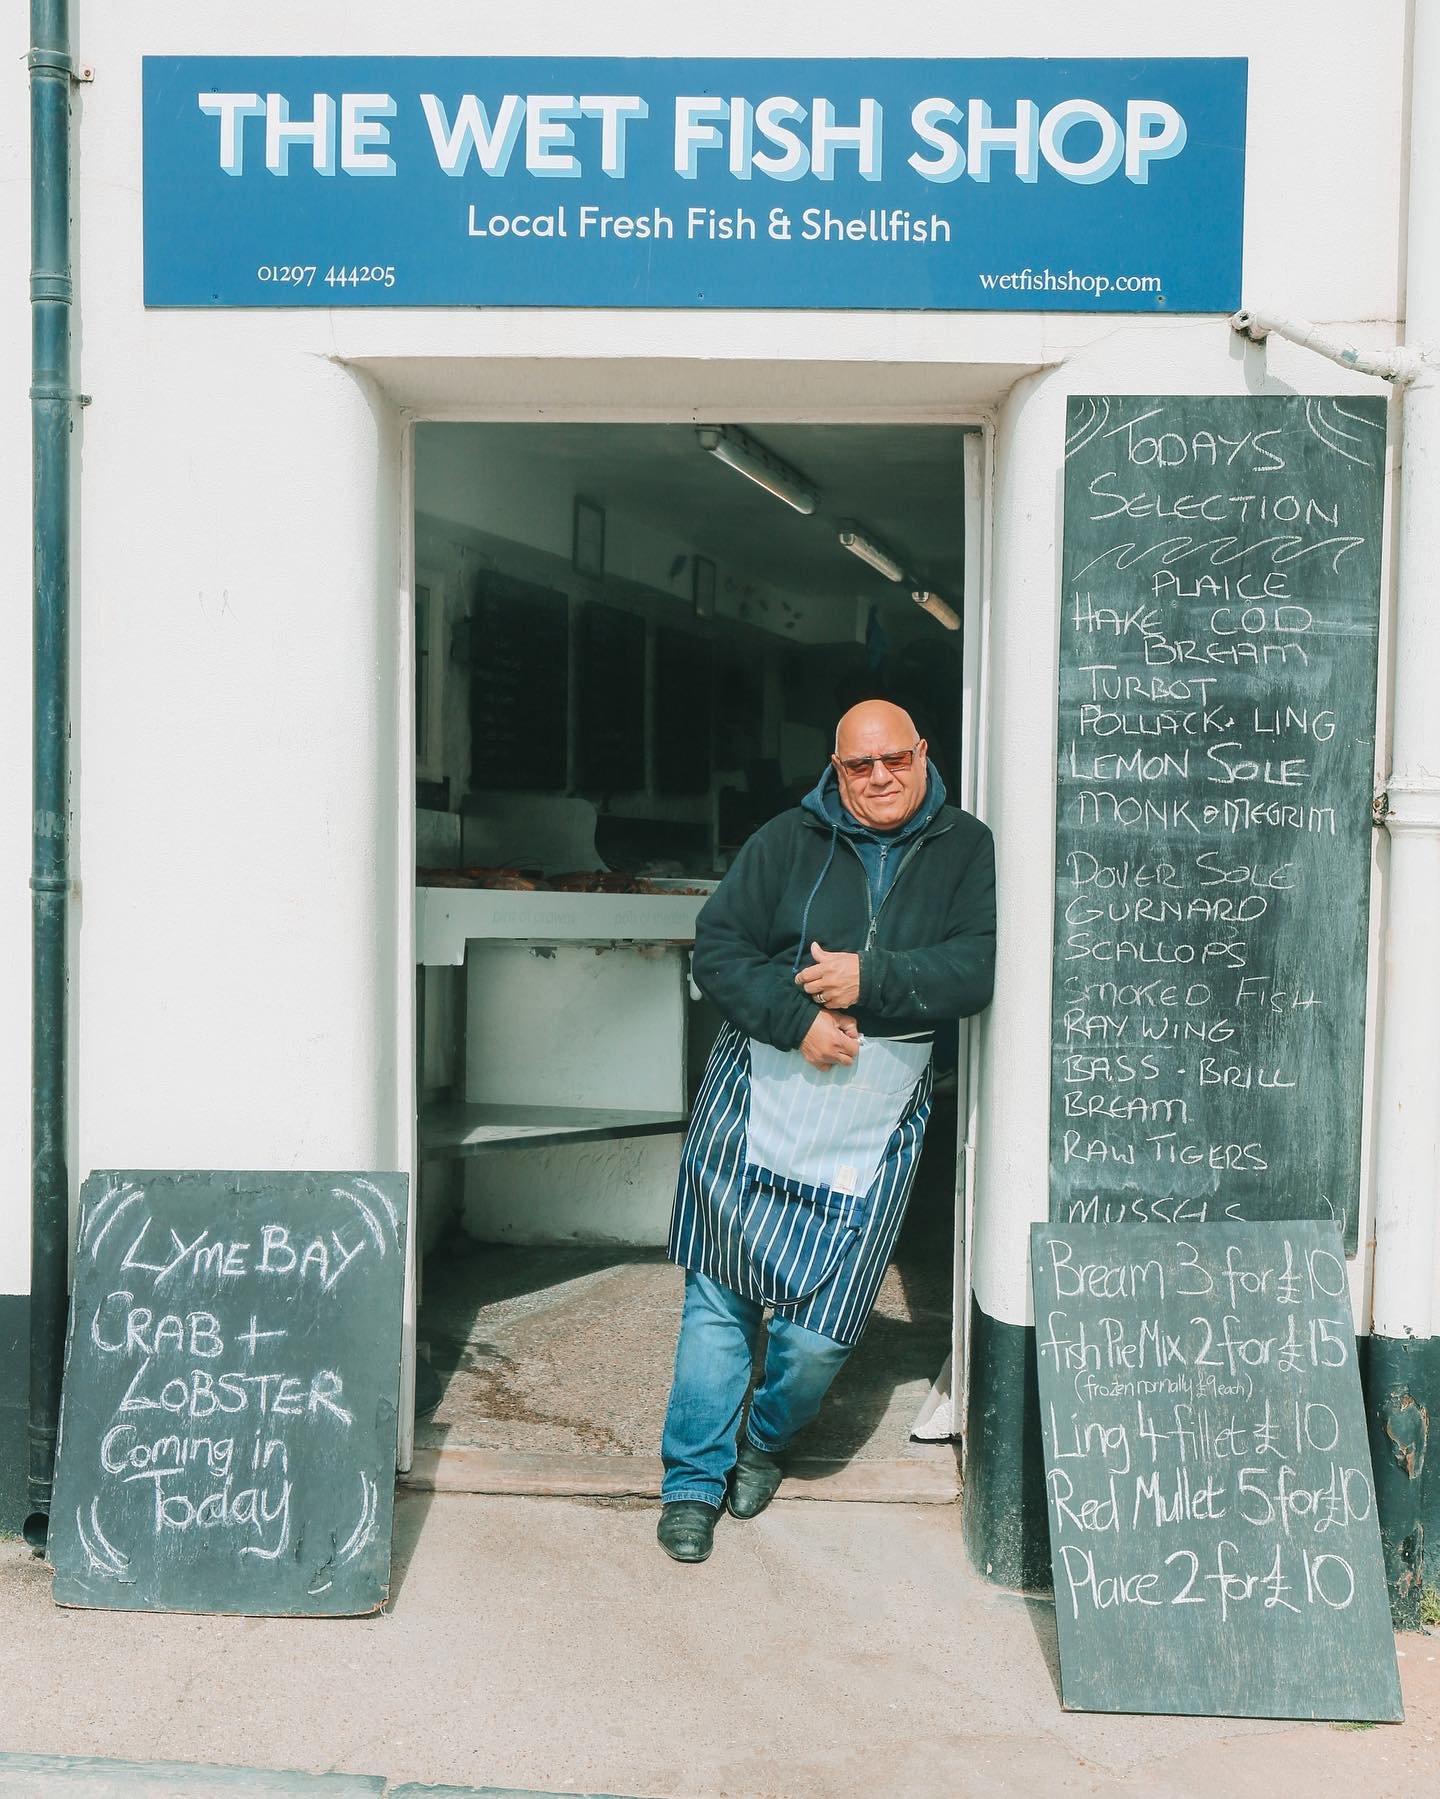 LIKE A LOCAL 

@thewetfishshop 
Taste of the West award winning, local produce, freshly caught-and located right on the cobb-this is a must visit seafood spot! 
AND their new location will be opening on 18th May, @millersfarmshop 12pm! We&rsquo;ll be